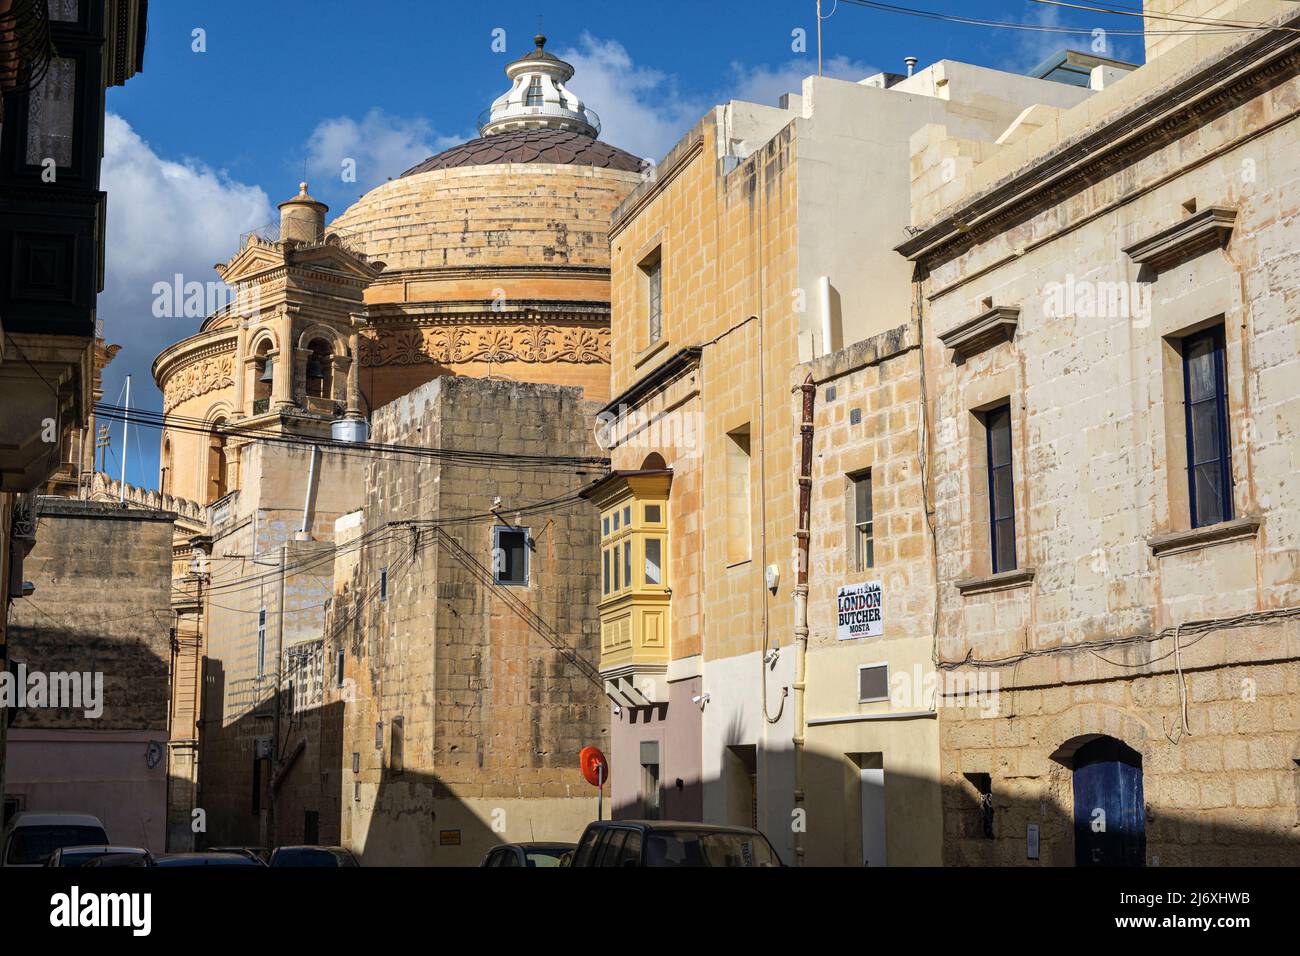 The Mosta Rotunda seen from the back streets of the town, Malta Stock Photo